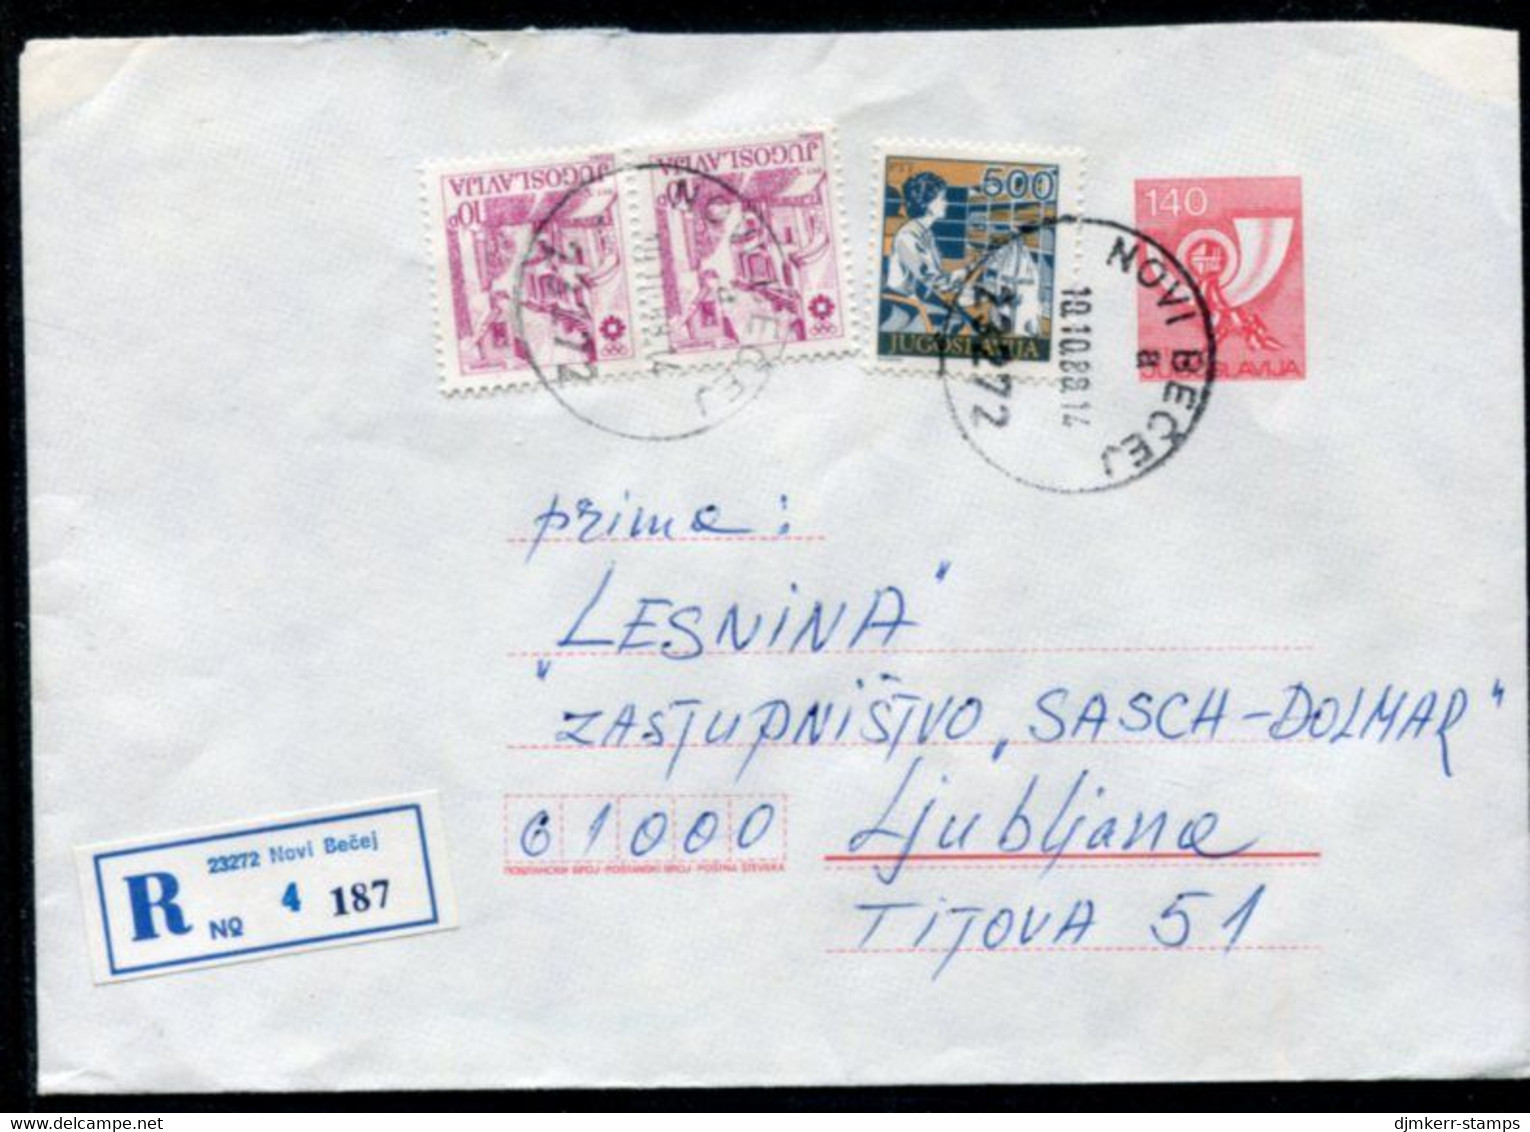 YUGOSLAVIA 1988 Posthorn 140 D.stationery Envelope Used With Additional Franking.  Michel U81 - Entiers Postaux